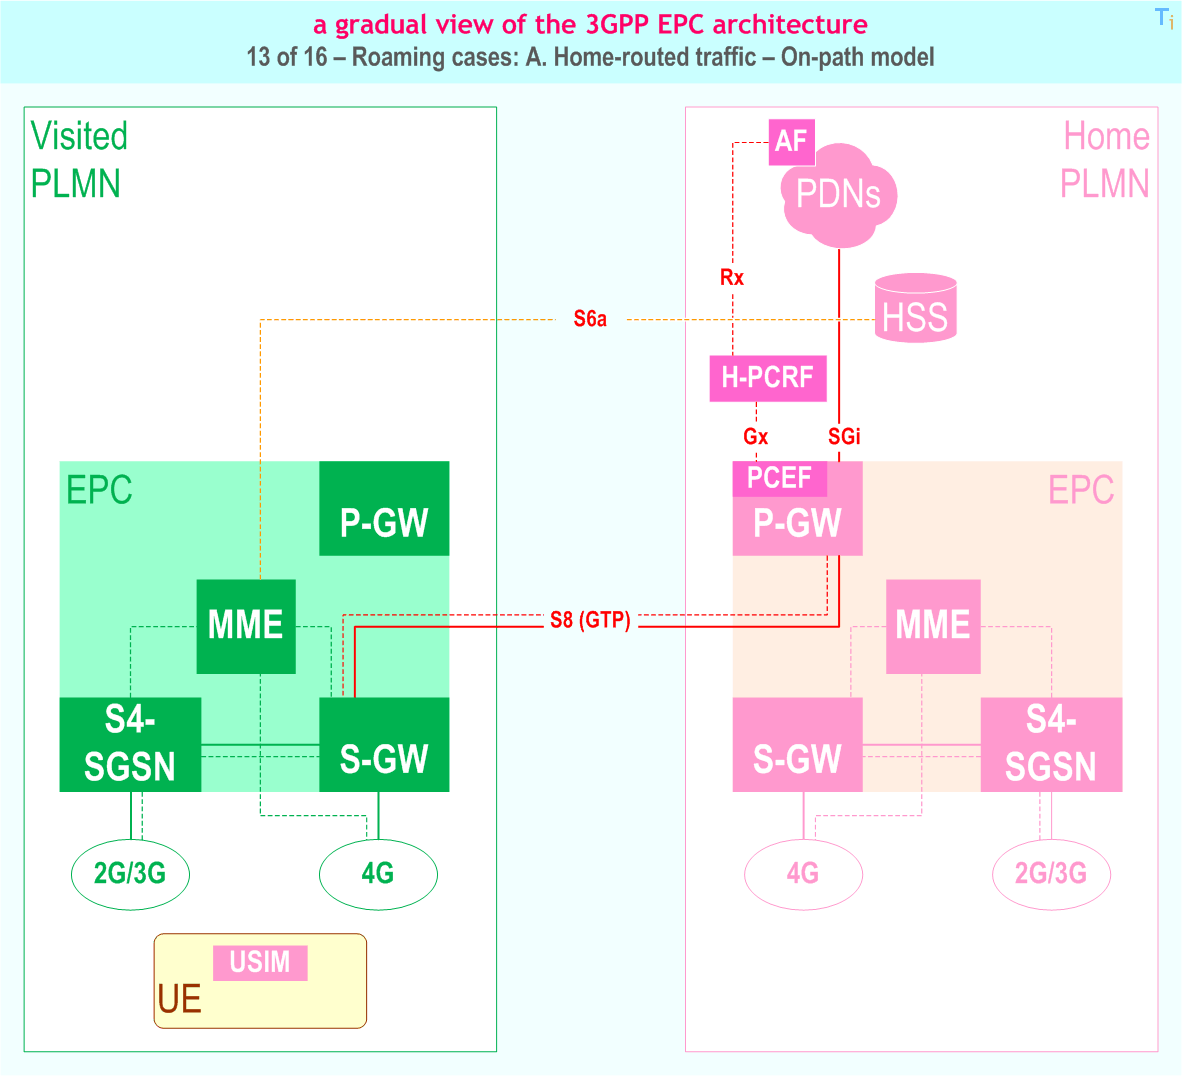 Gradual view of the 3GPP EPC (Evolved Packet Core) architecture - 13 of 16 - EPC Roaming: Home-routed traffic - on-path model: S8 variant is GTP